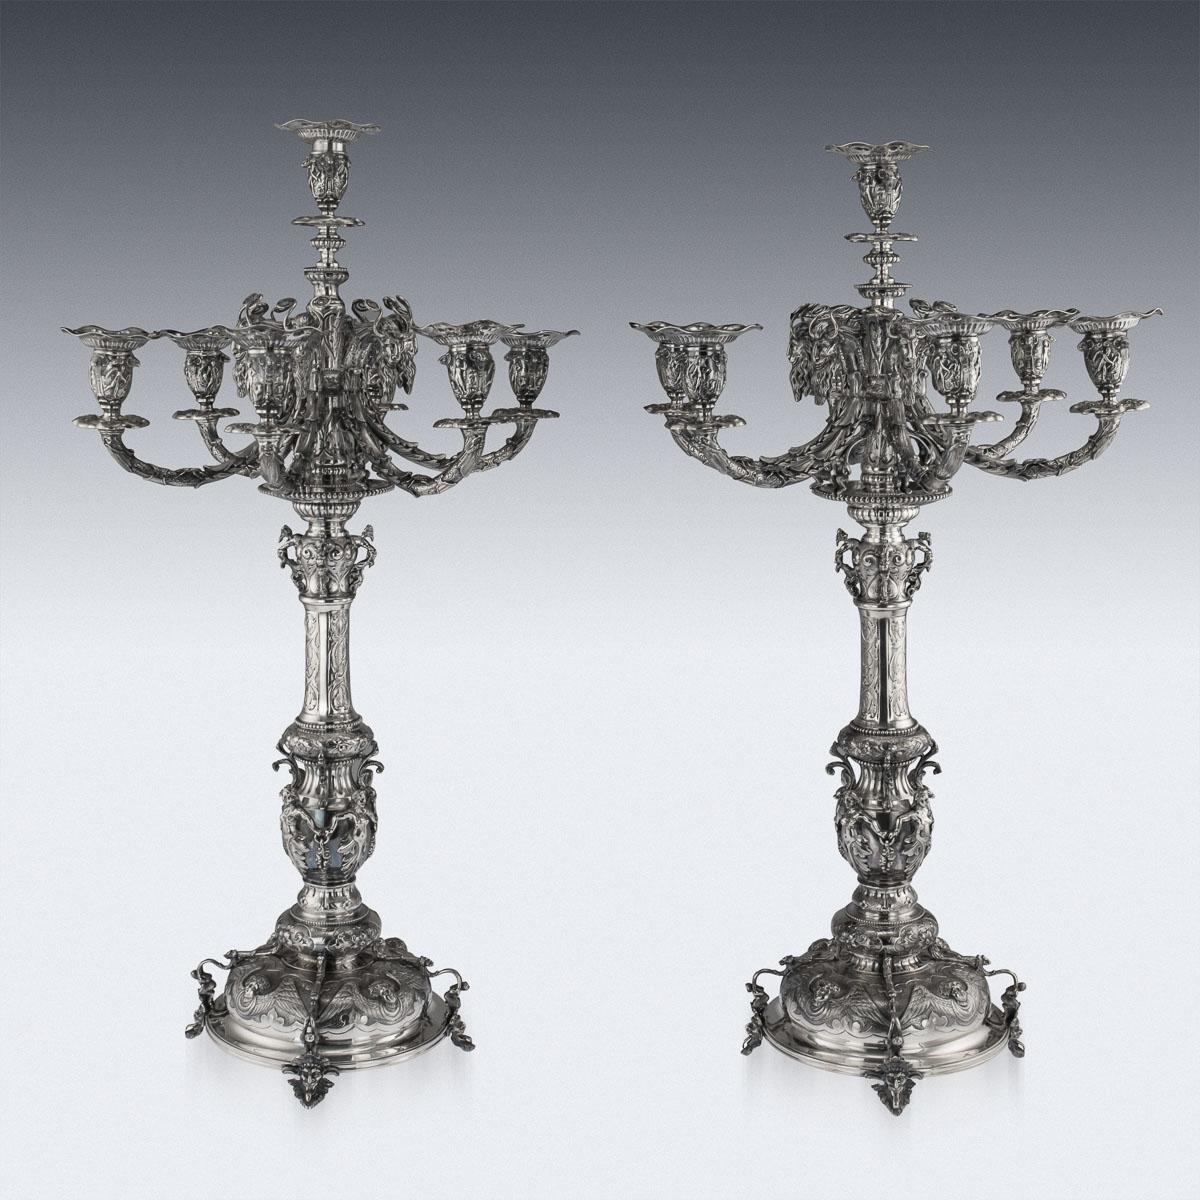 English Victorian Solid Silver Set of Four Candelabras, Macrae, circa 1872-1873 For Sale